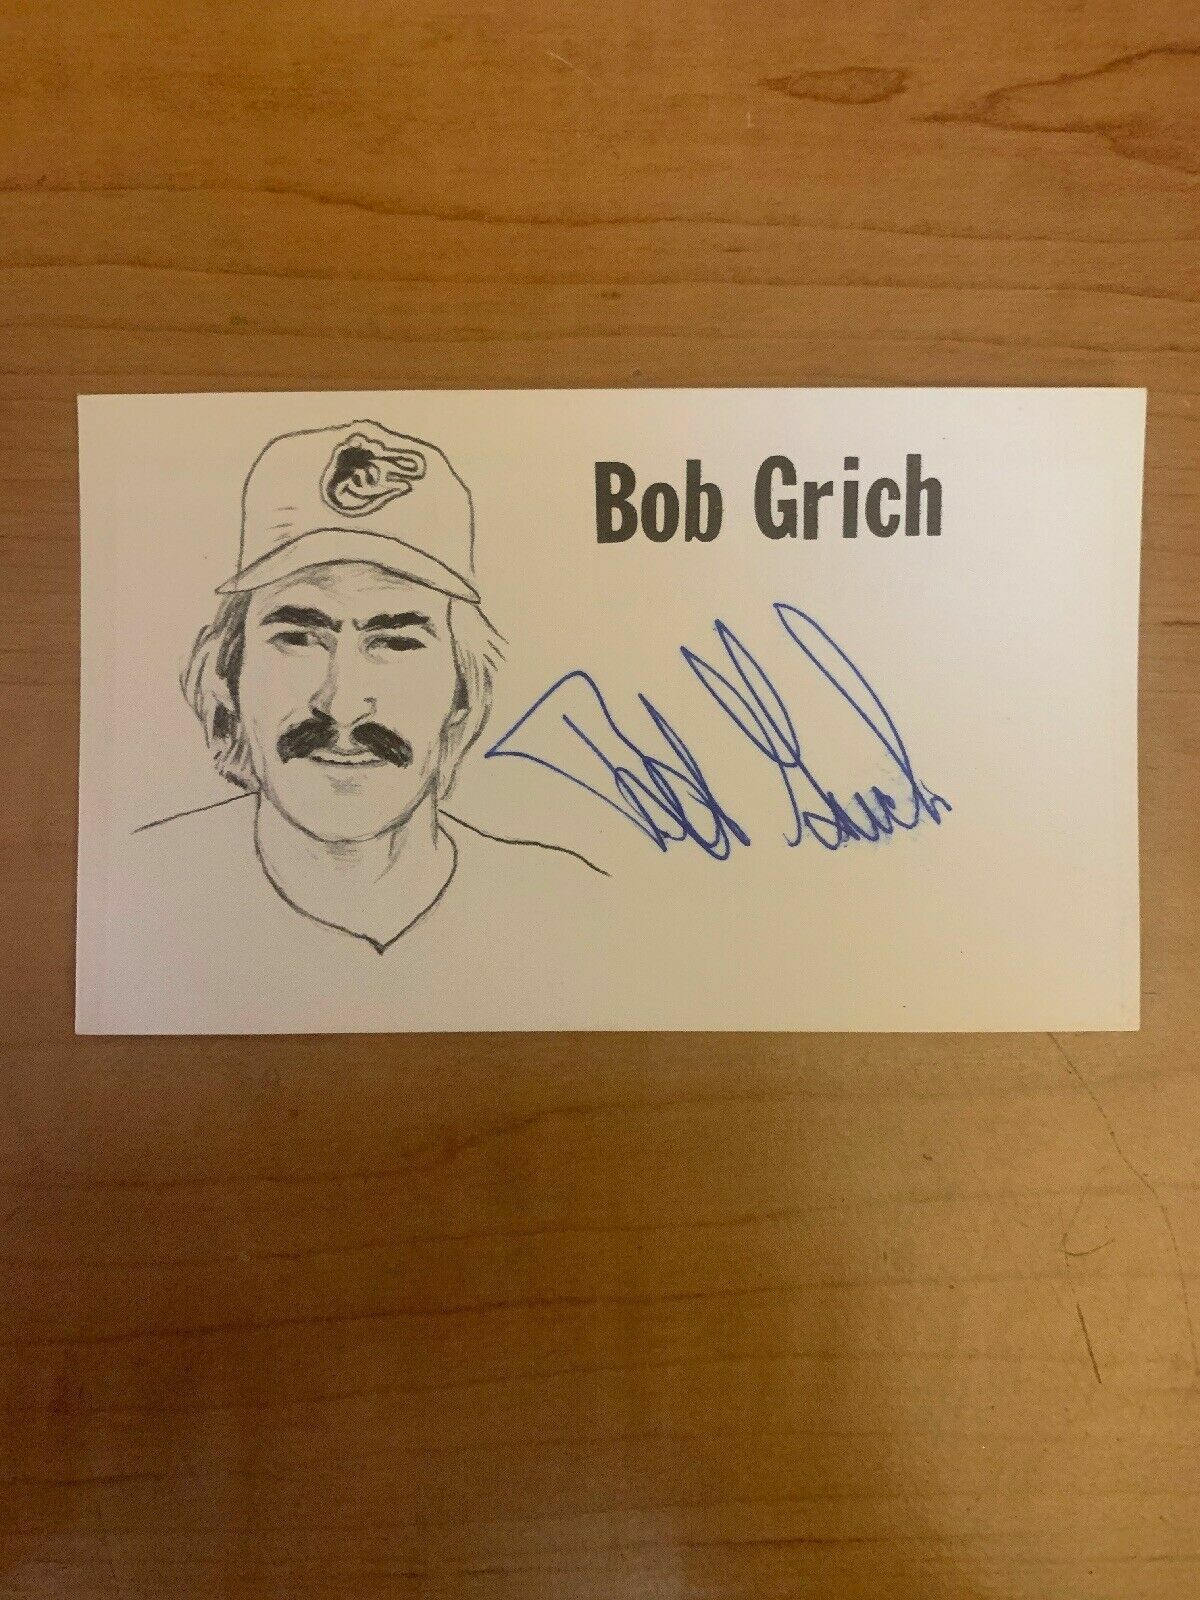 BOB GRICH - BASEBALL - AUTOGRAPH SIGNED - INDEX CARD - AUTHENTIC- B6445